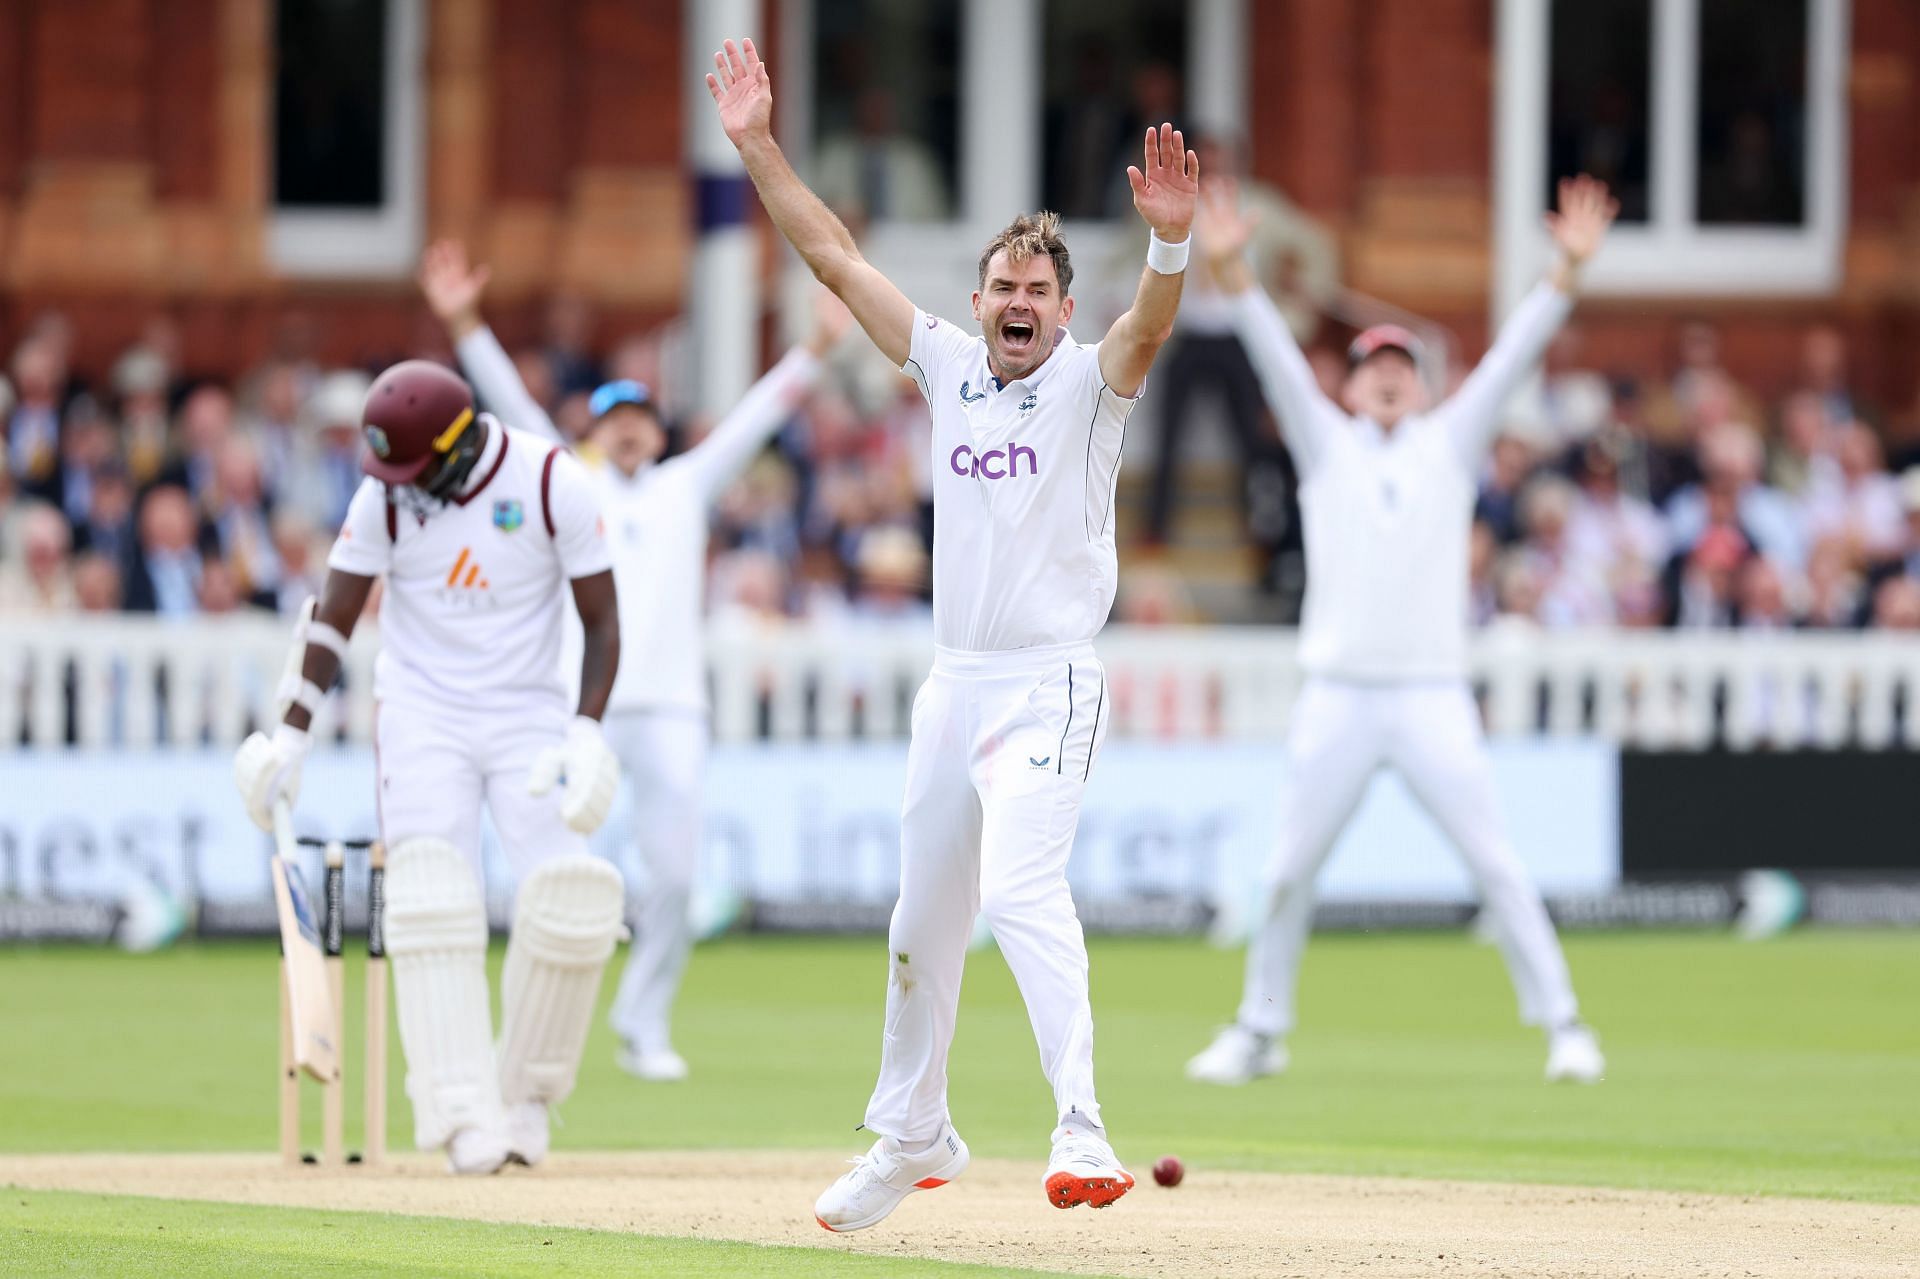 [Watch] James Anderson finally strikes by dismissing Jayden Seales lbw to bag 1st wicket of his farewell Test in ENG vs WI series opener